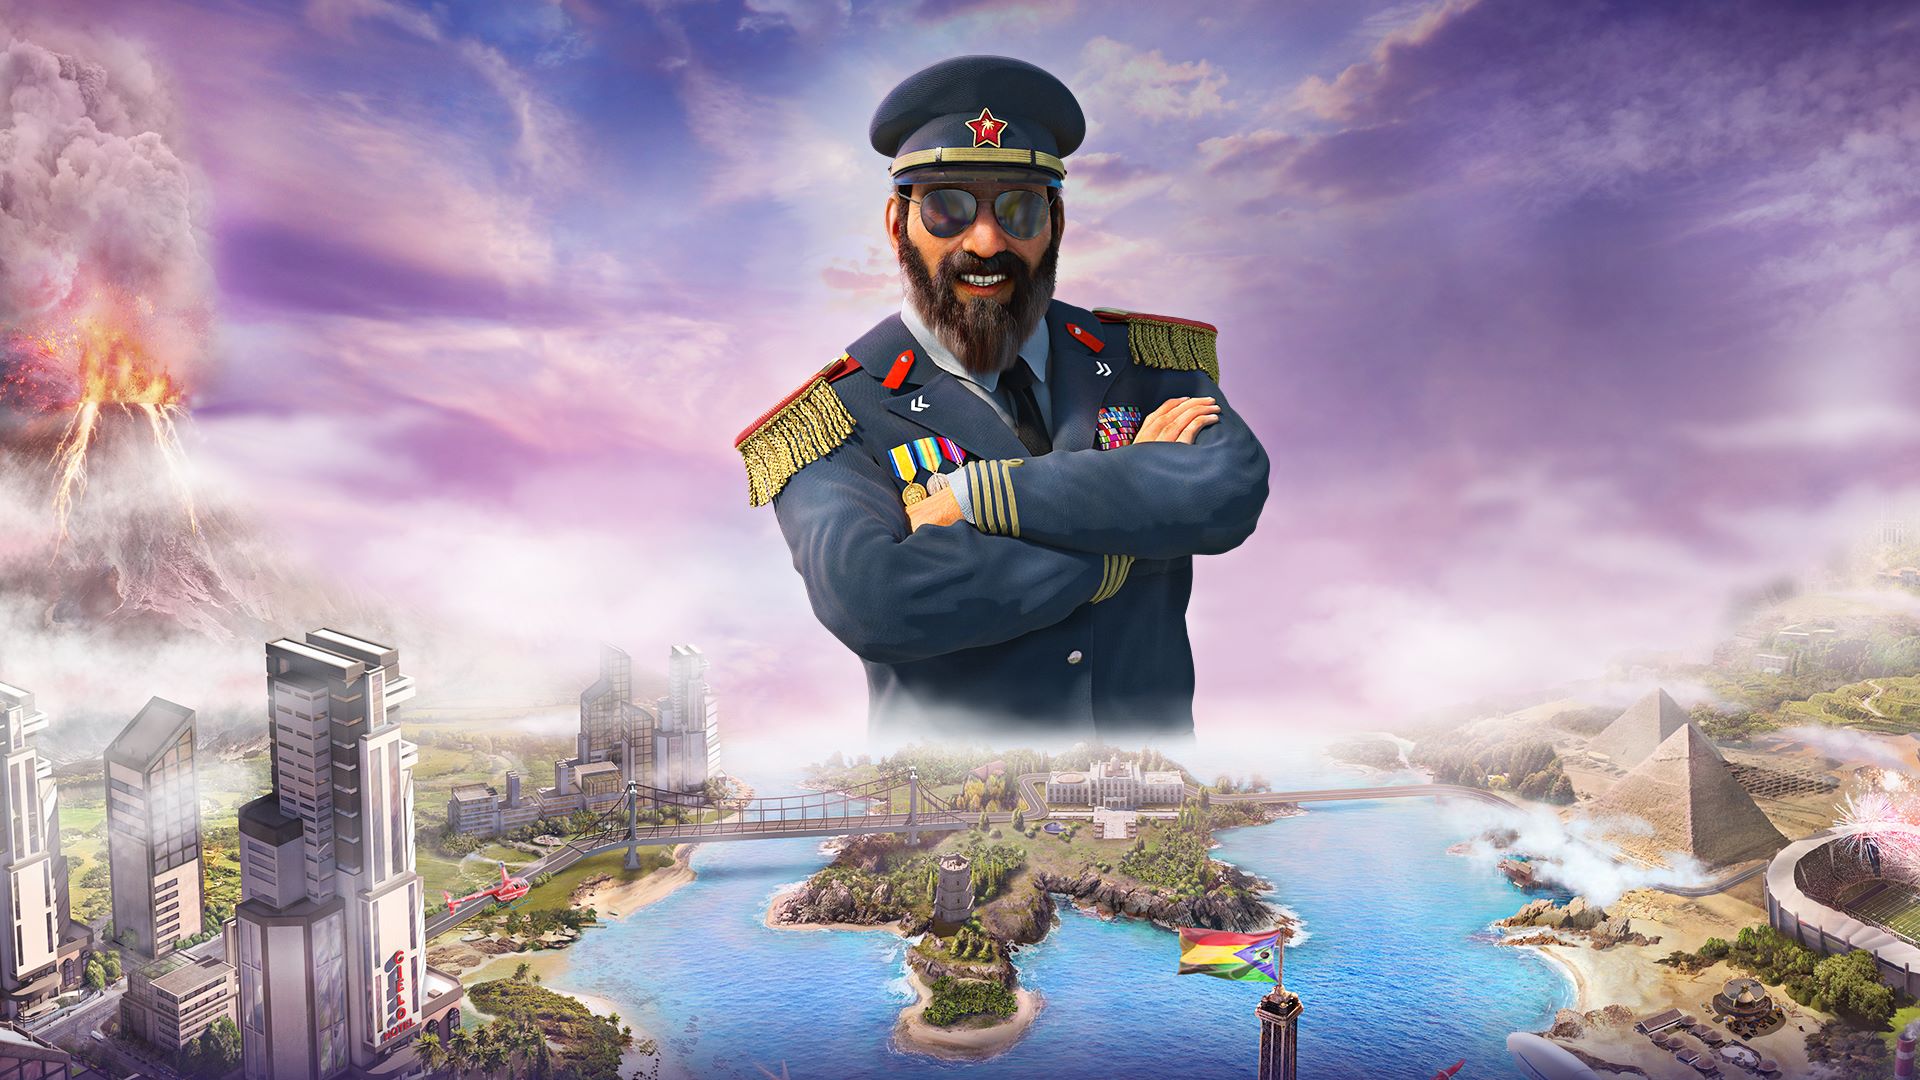 Tropico arrives on PS4 Xbox One this September | VG247